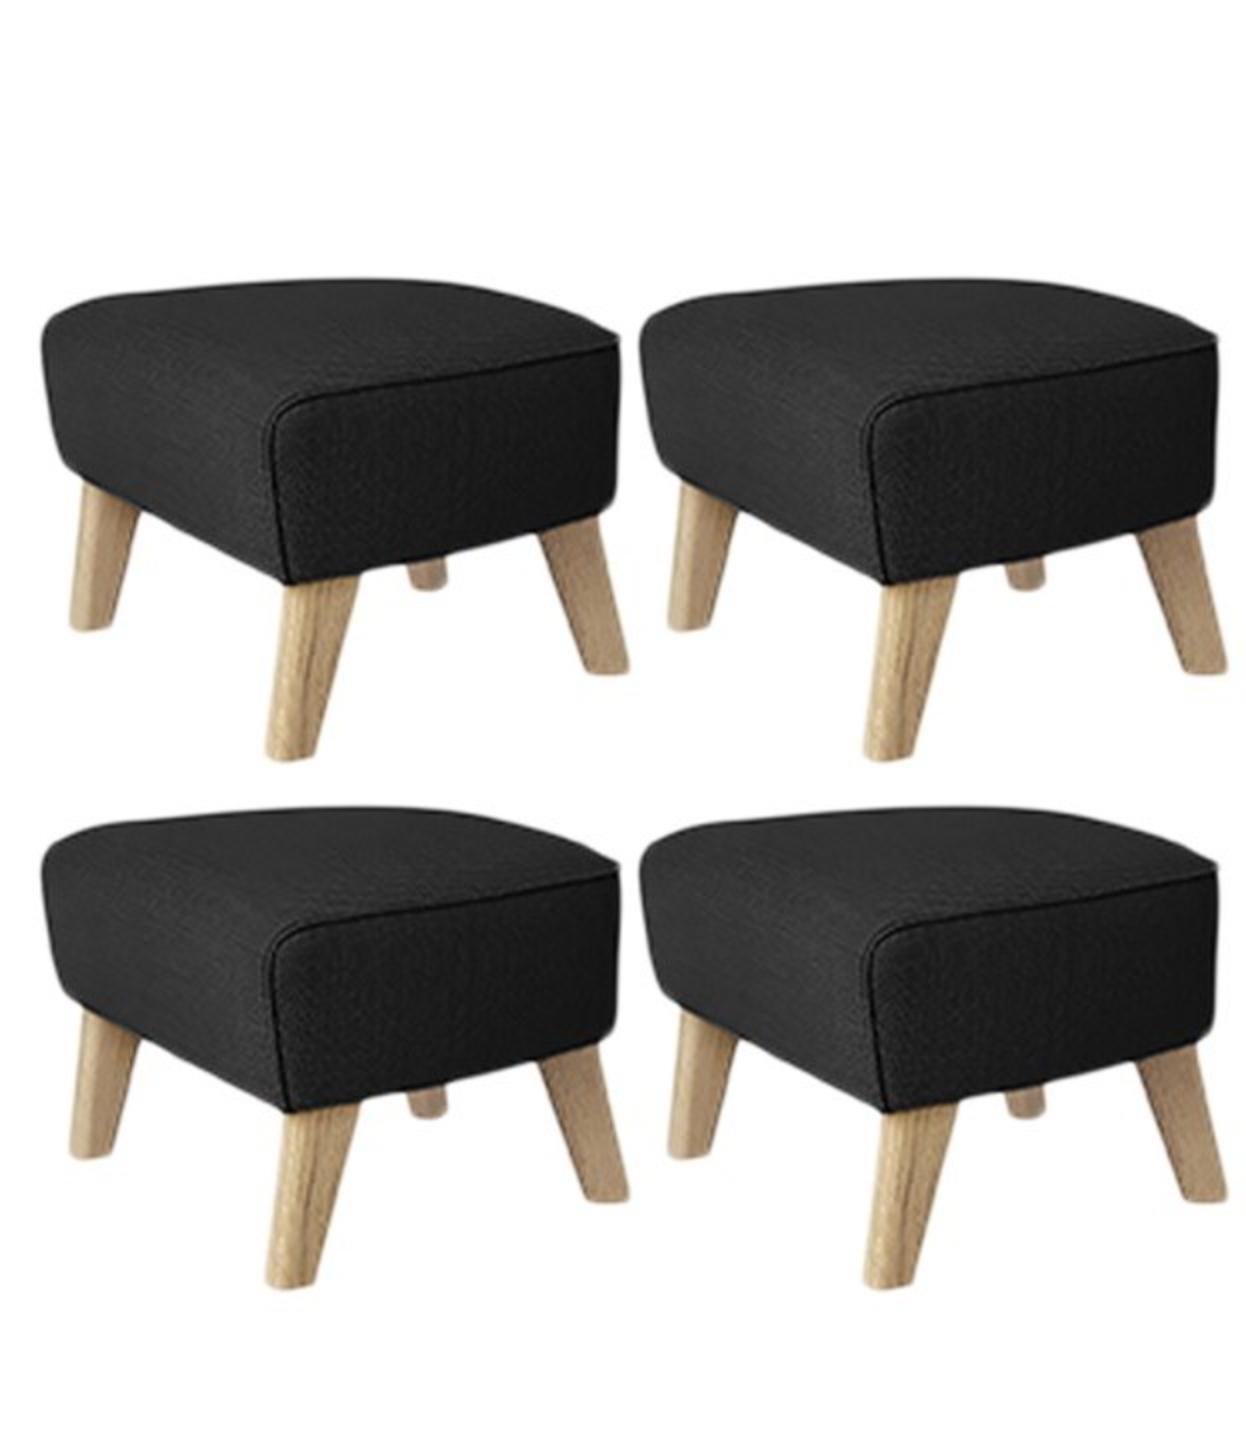 Set of 4 dark grey, natural oak Raf Simons Vidar3 My Own Chair Footstool by Lassen
Dimensions: W 56 x D 58 x H 40 cm 
Materials: textile, oak
Also available: other colors available.

The My Own Chair Footstool has been designed in the same